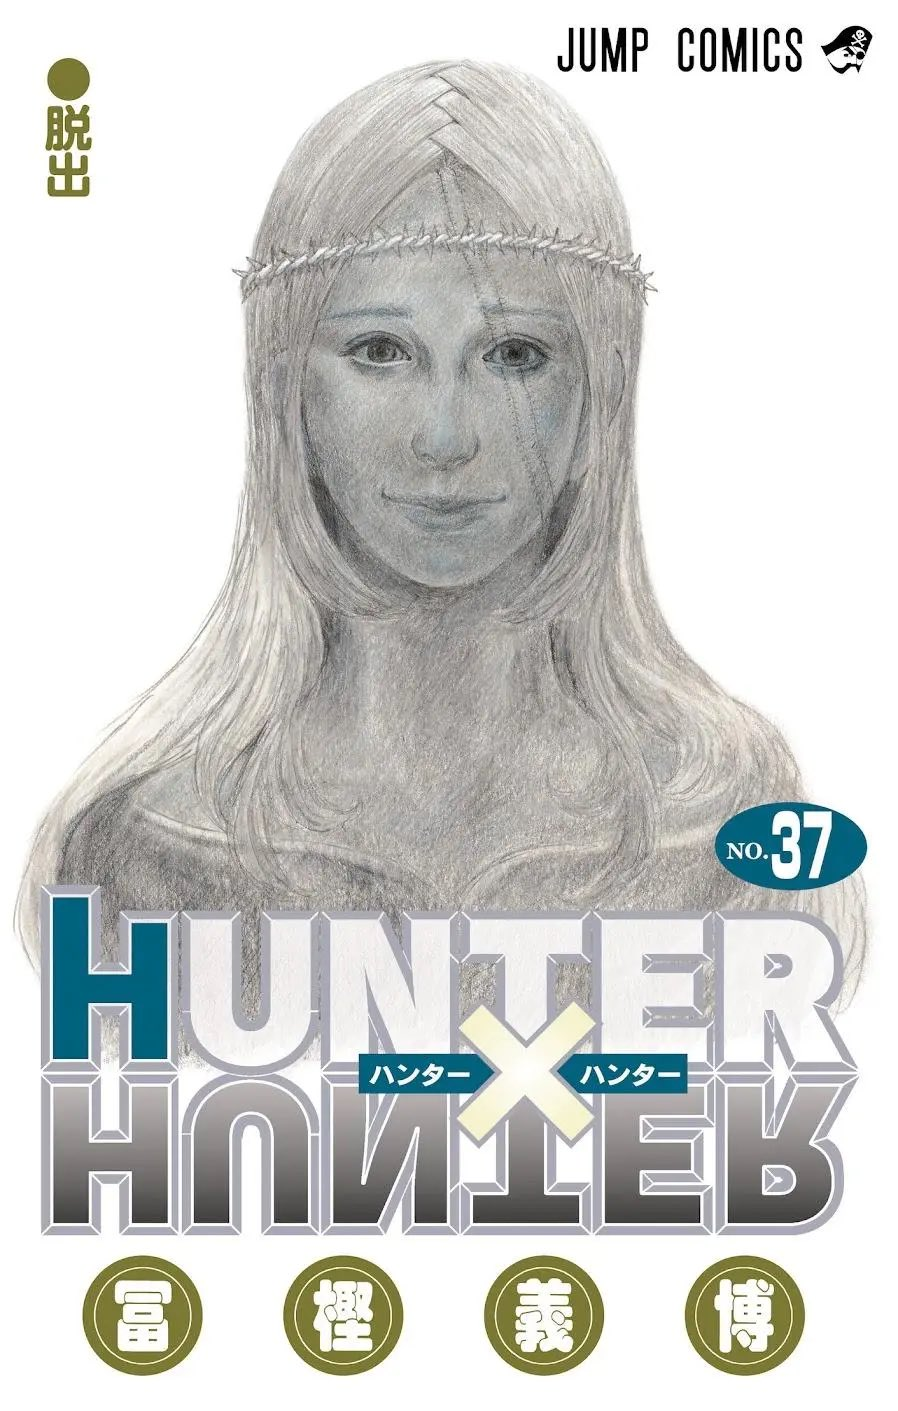 Hunter x Hunter, Vol. 12, Book by Yoshihiro Togashi, Official Publisher  Page